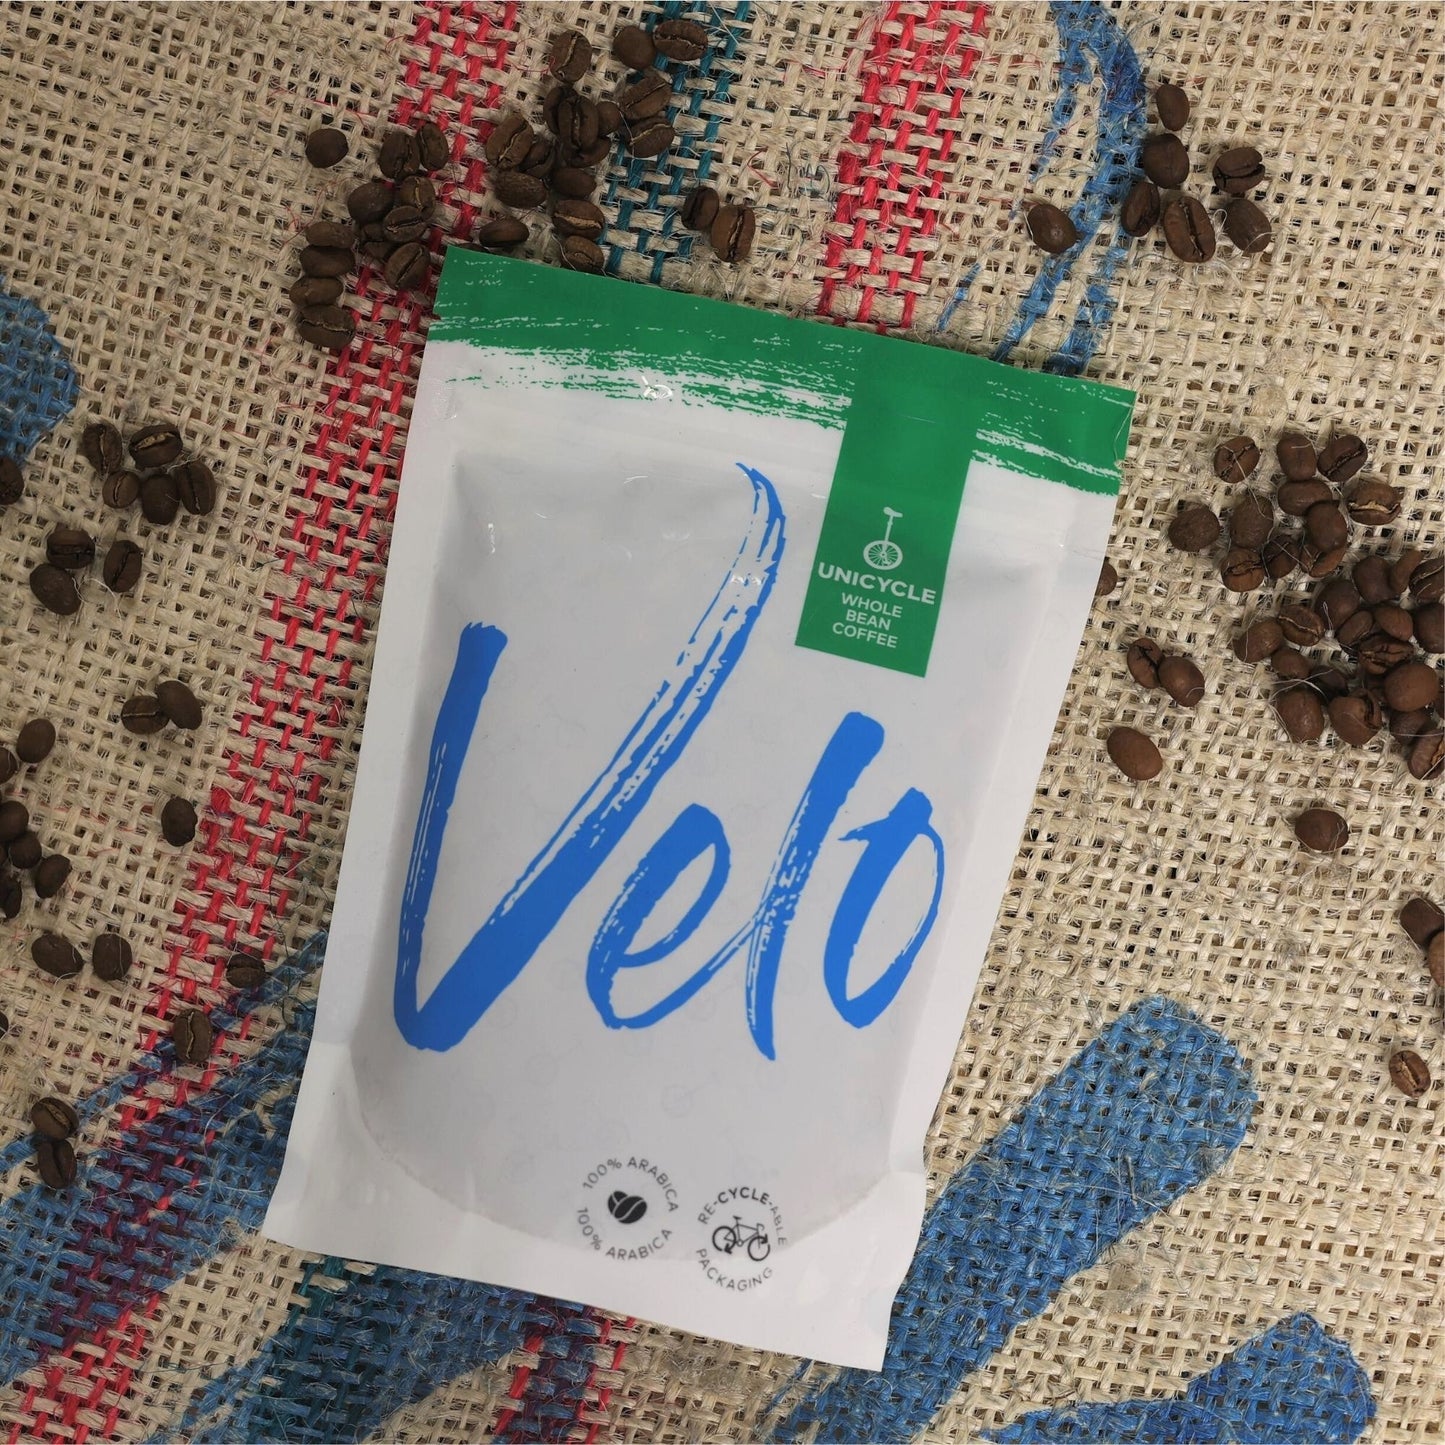 Eagle Monte Carmelo 200g Coffee From Brazil - White and Green bag - Velo Coffee Roasters